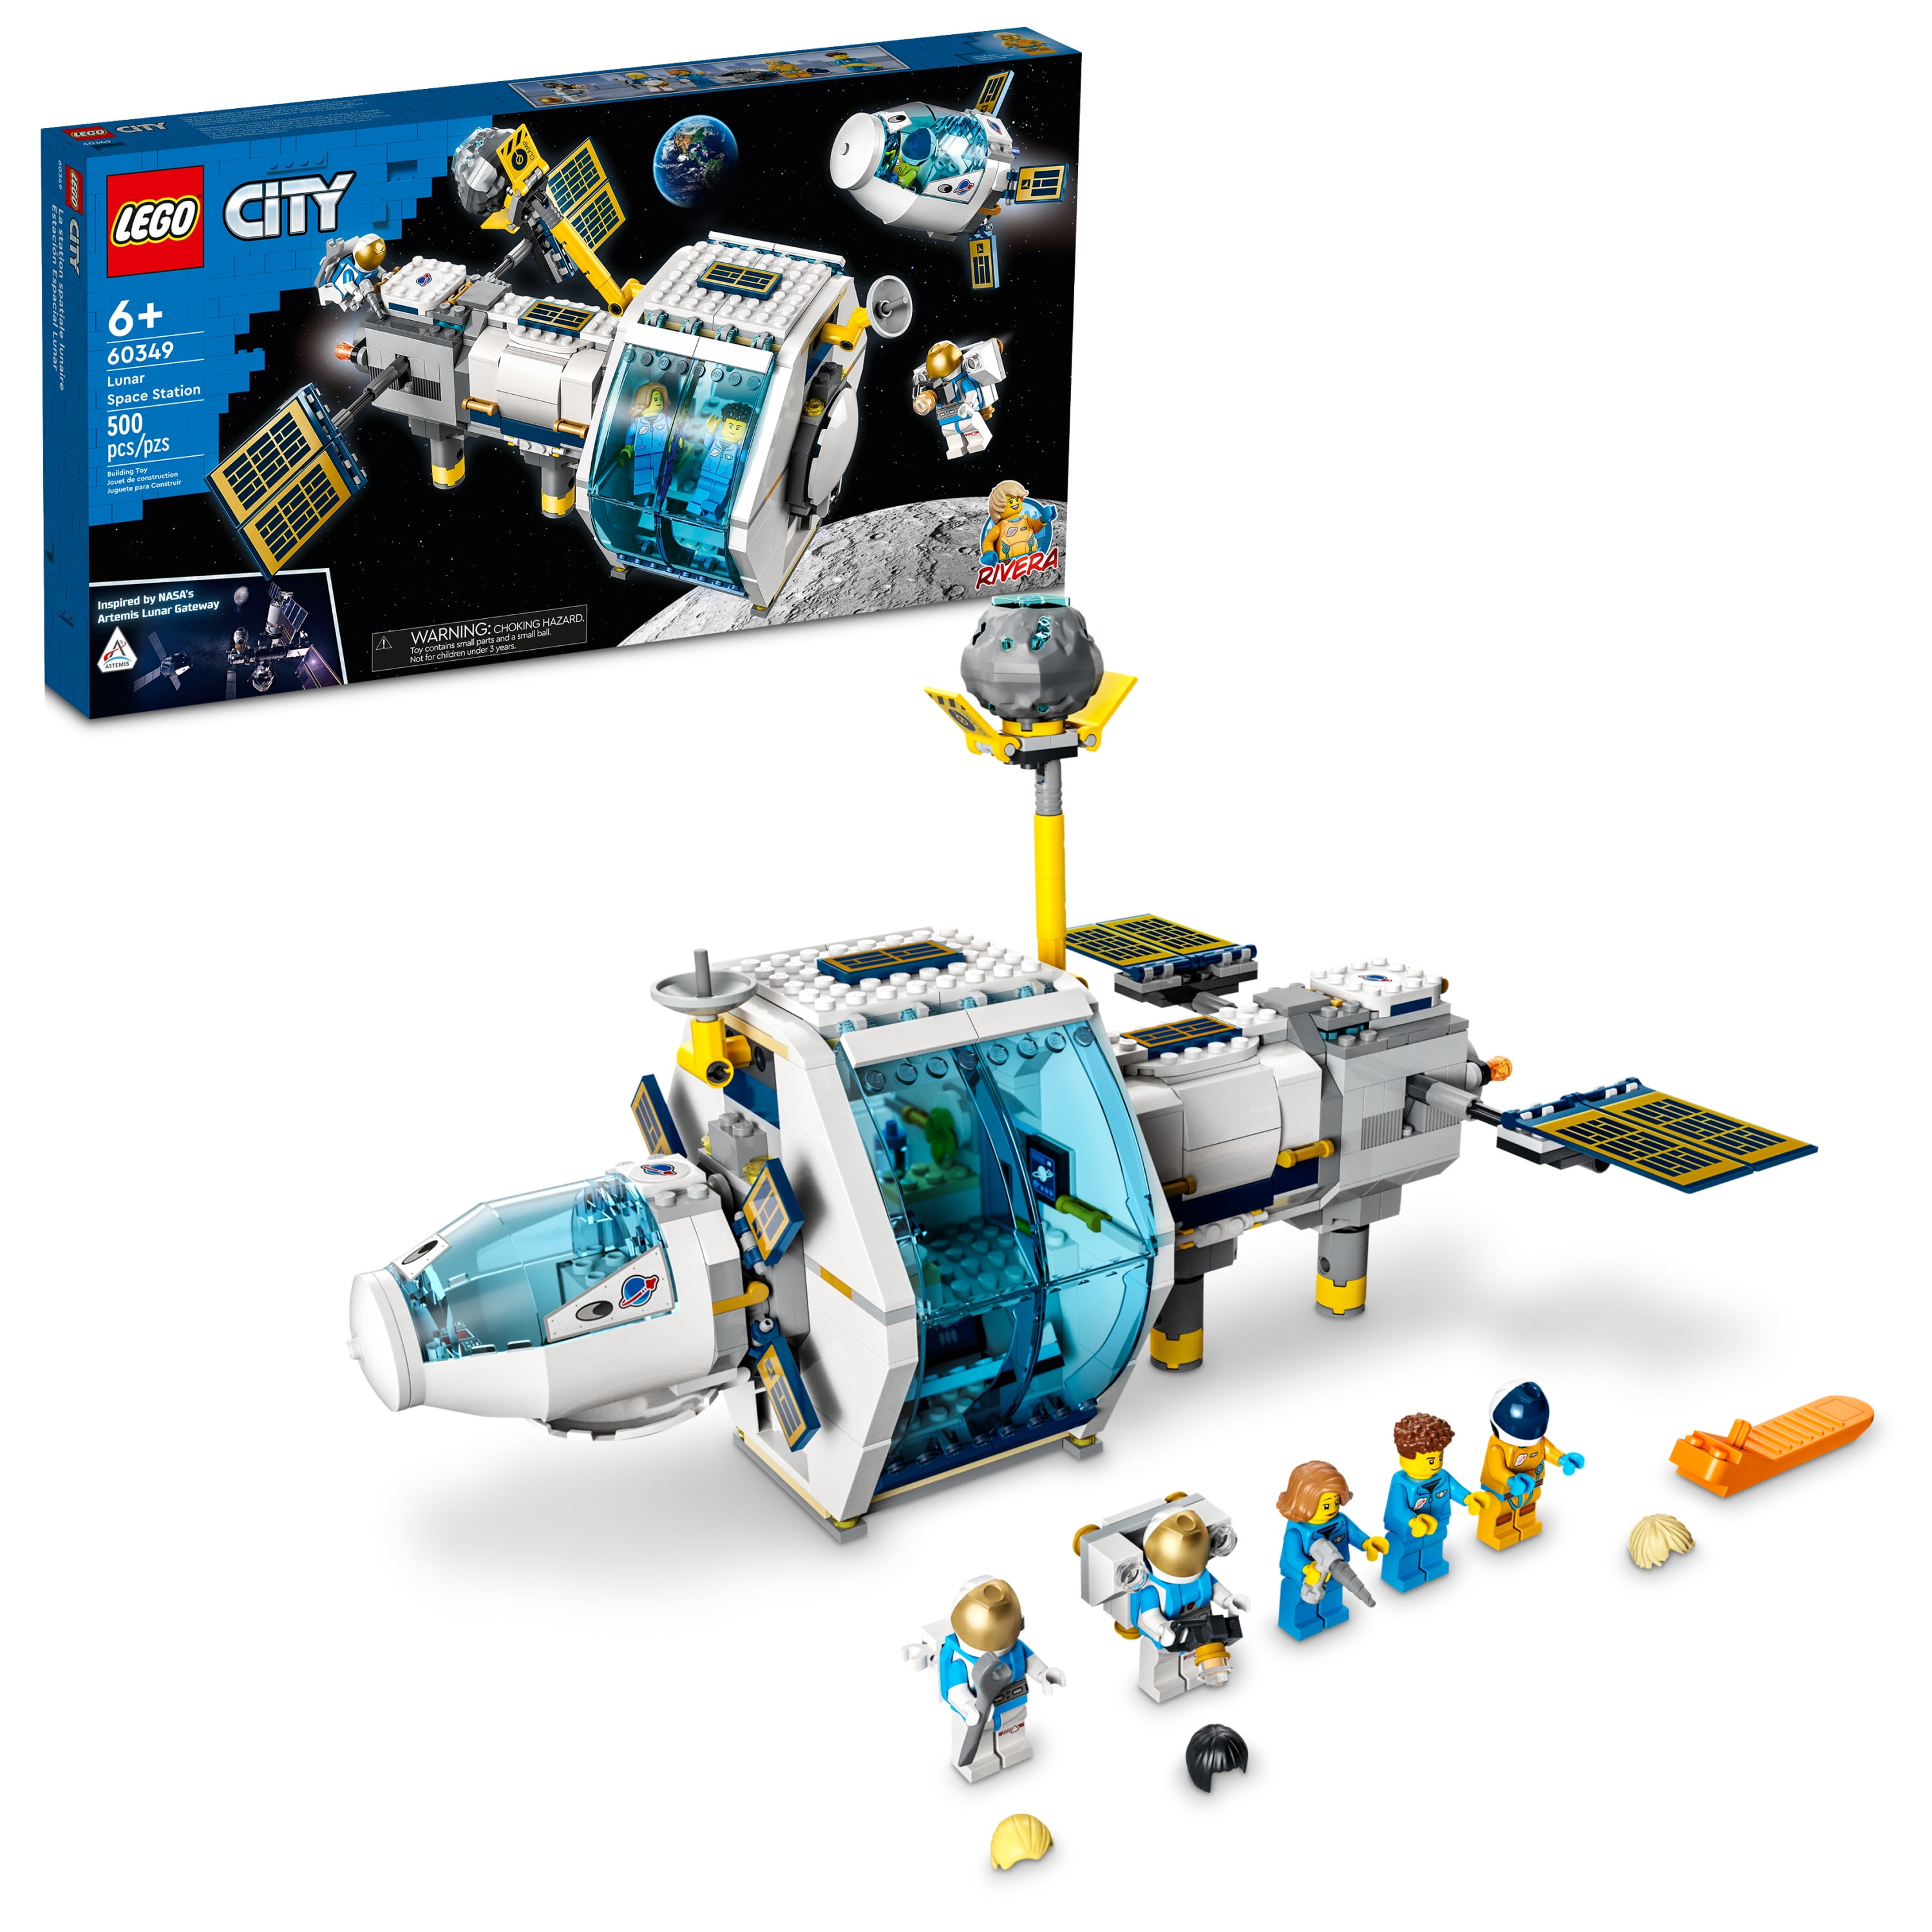 LEGO City Lunar Space Station, 60349 NASA Inspired Building Model Set with Docking Capsule, Labs and Astronaut Minifigures -